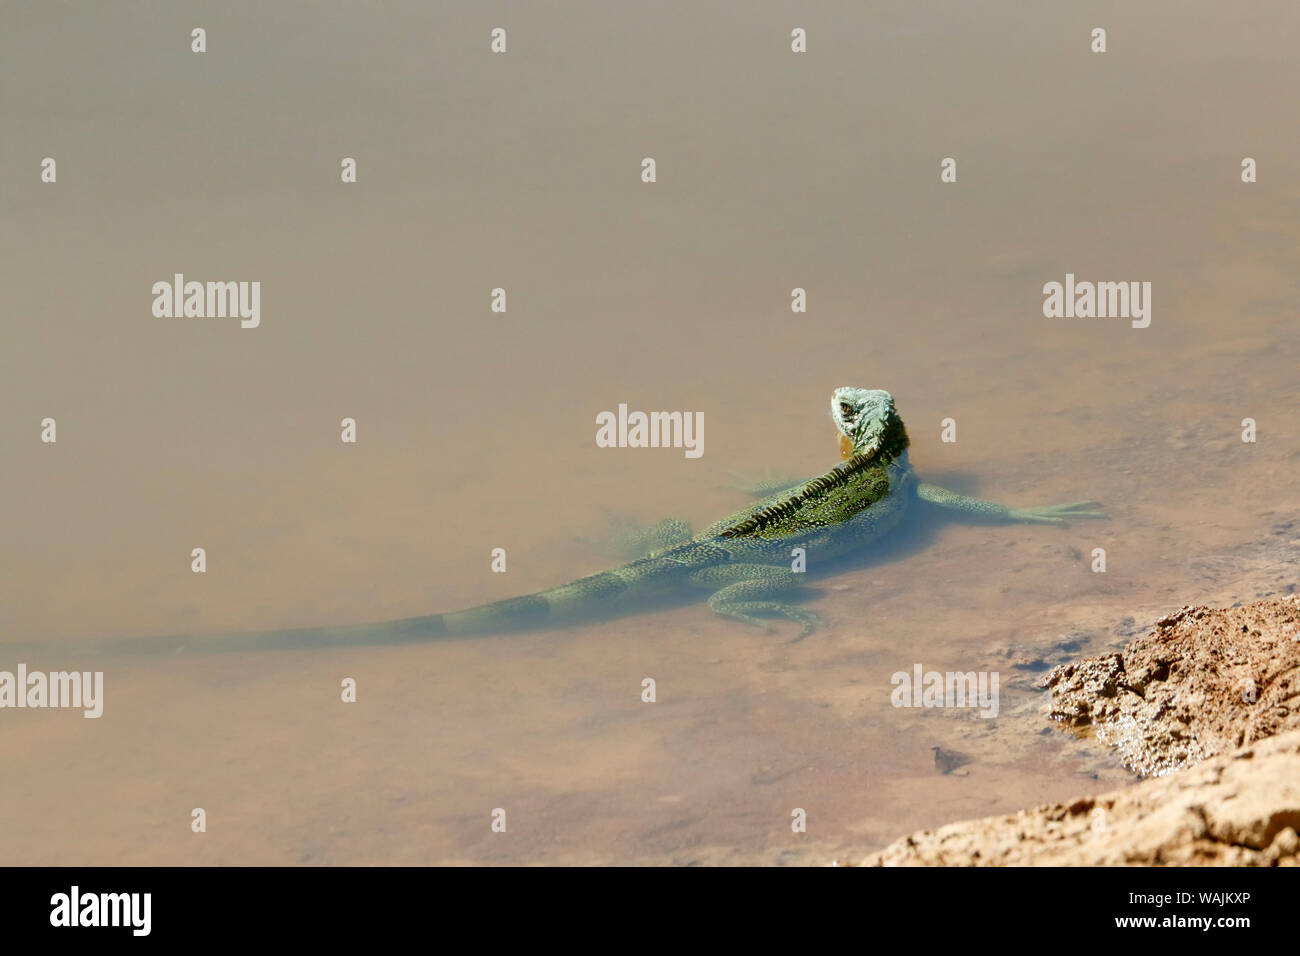 Pantanal, Mato Grosso, Brazil. Green Iguana in the shallows of a river. Green, or common, iguanas are among the largest lizards in the Americas, averaging around 6.5 feet (2 meters) long and weighing about 11 pounds (5 kilograms). Stock Photo